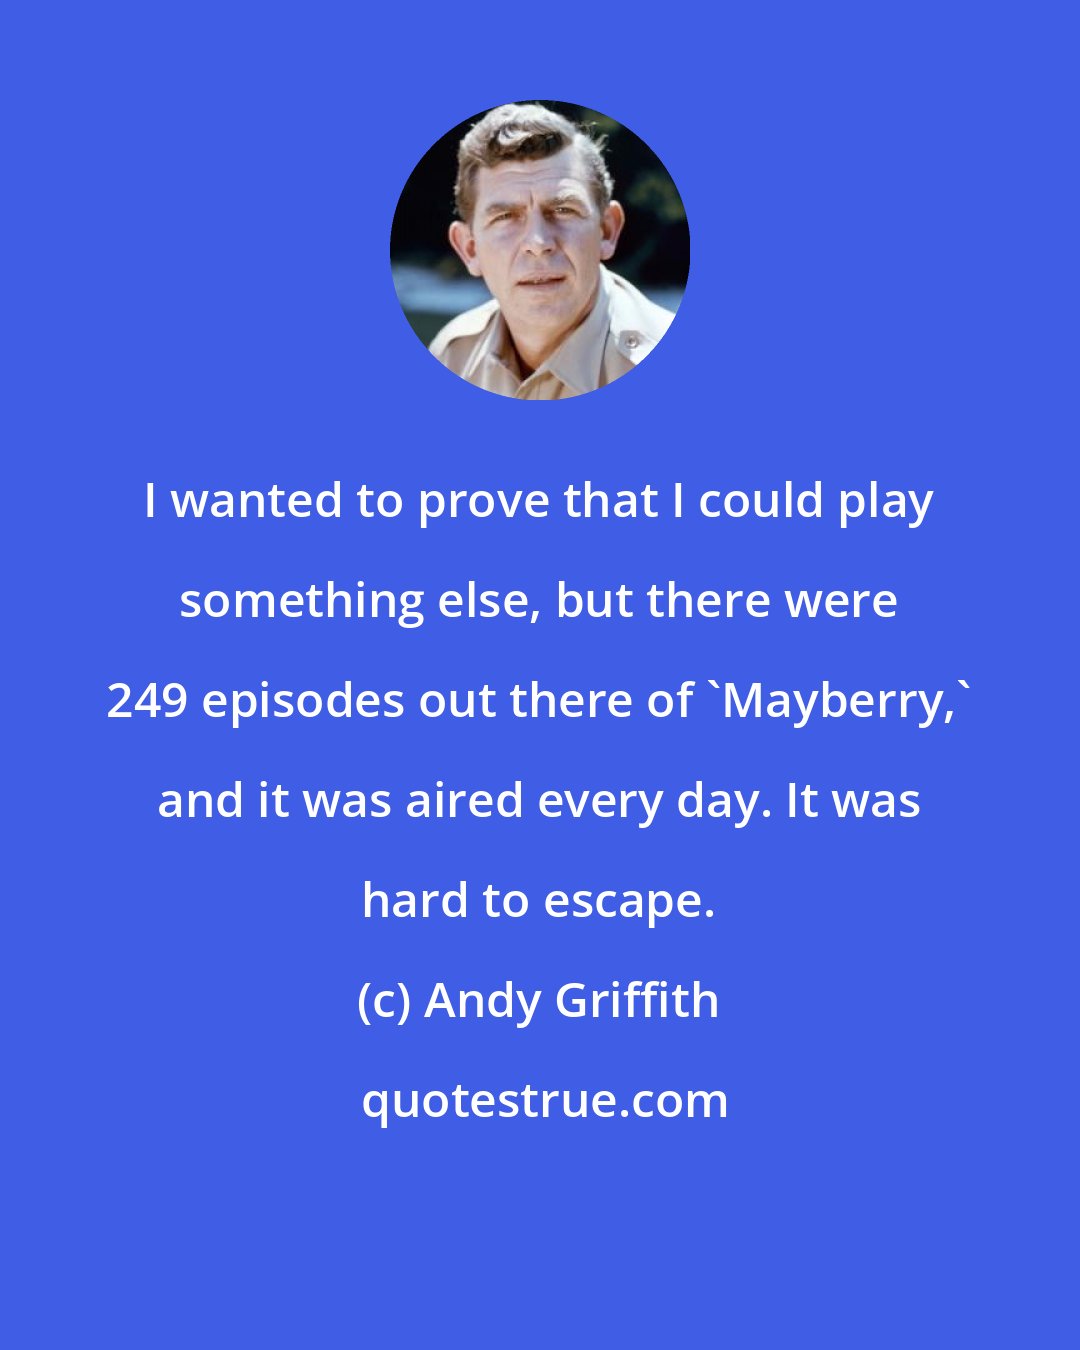 Andy Griffith: I wanted to prove that I could play something else, but there were 249 episodes out there of 'Mayberry,' and it was aired every day. It was hard to escape.